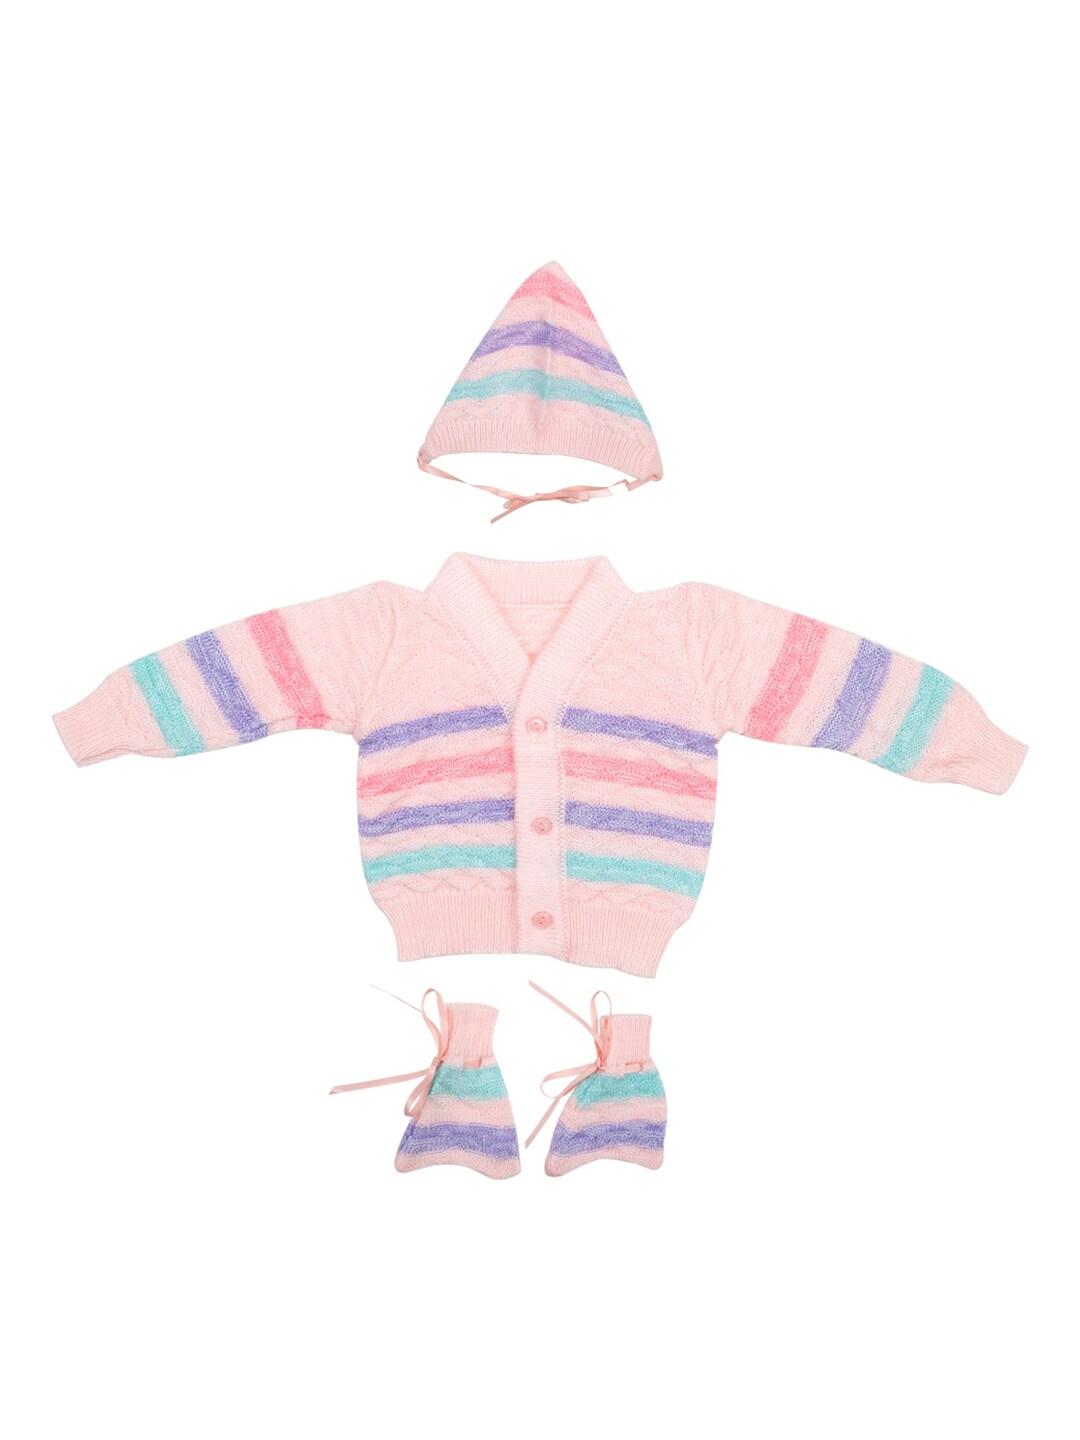 meemee unisex kids pink striped sweater with beanie and socks